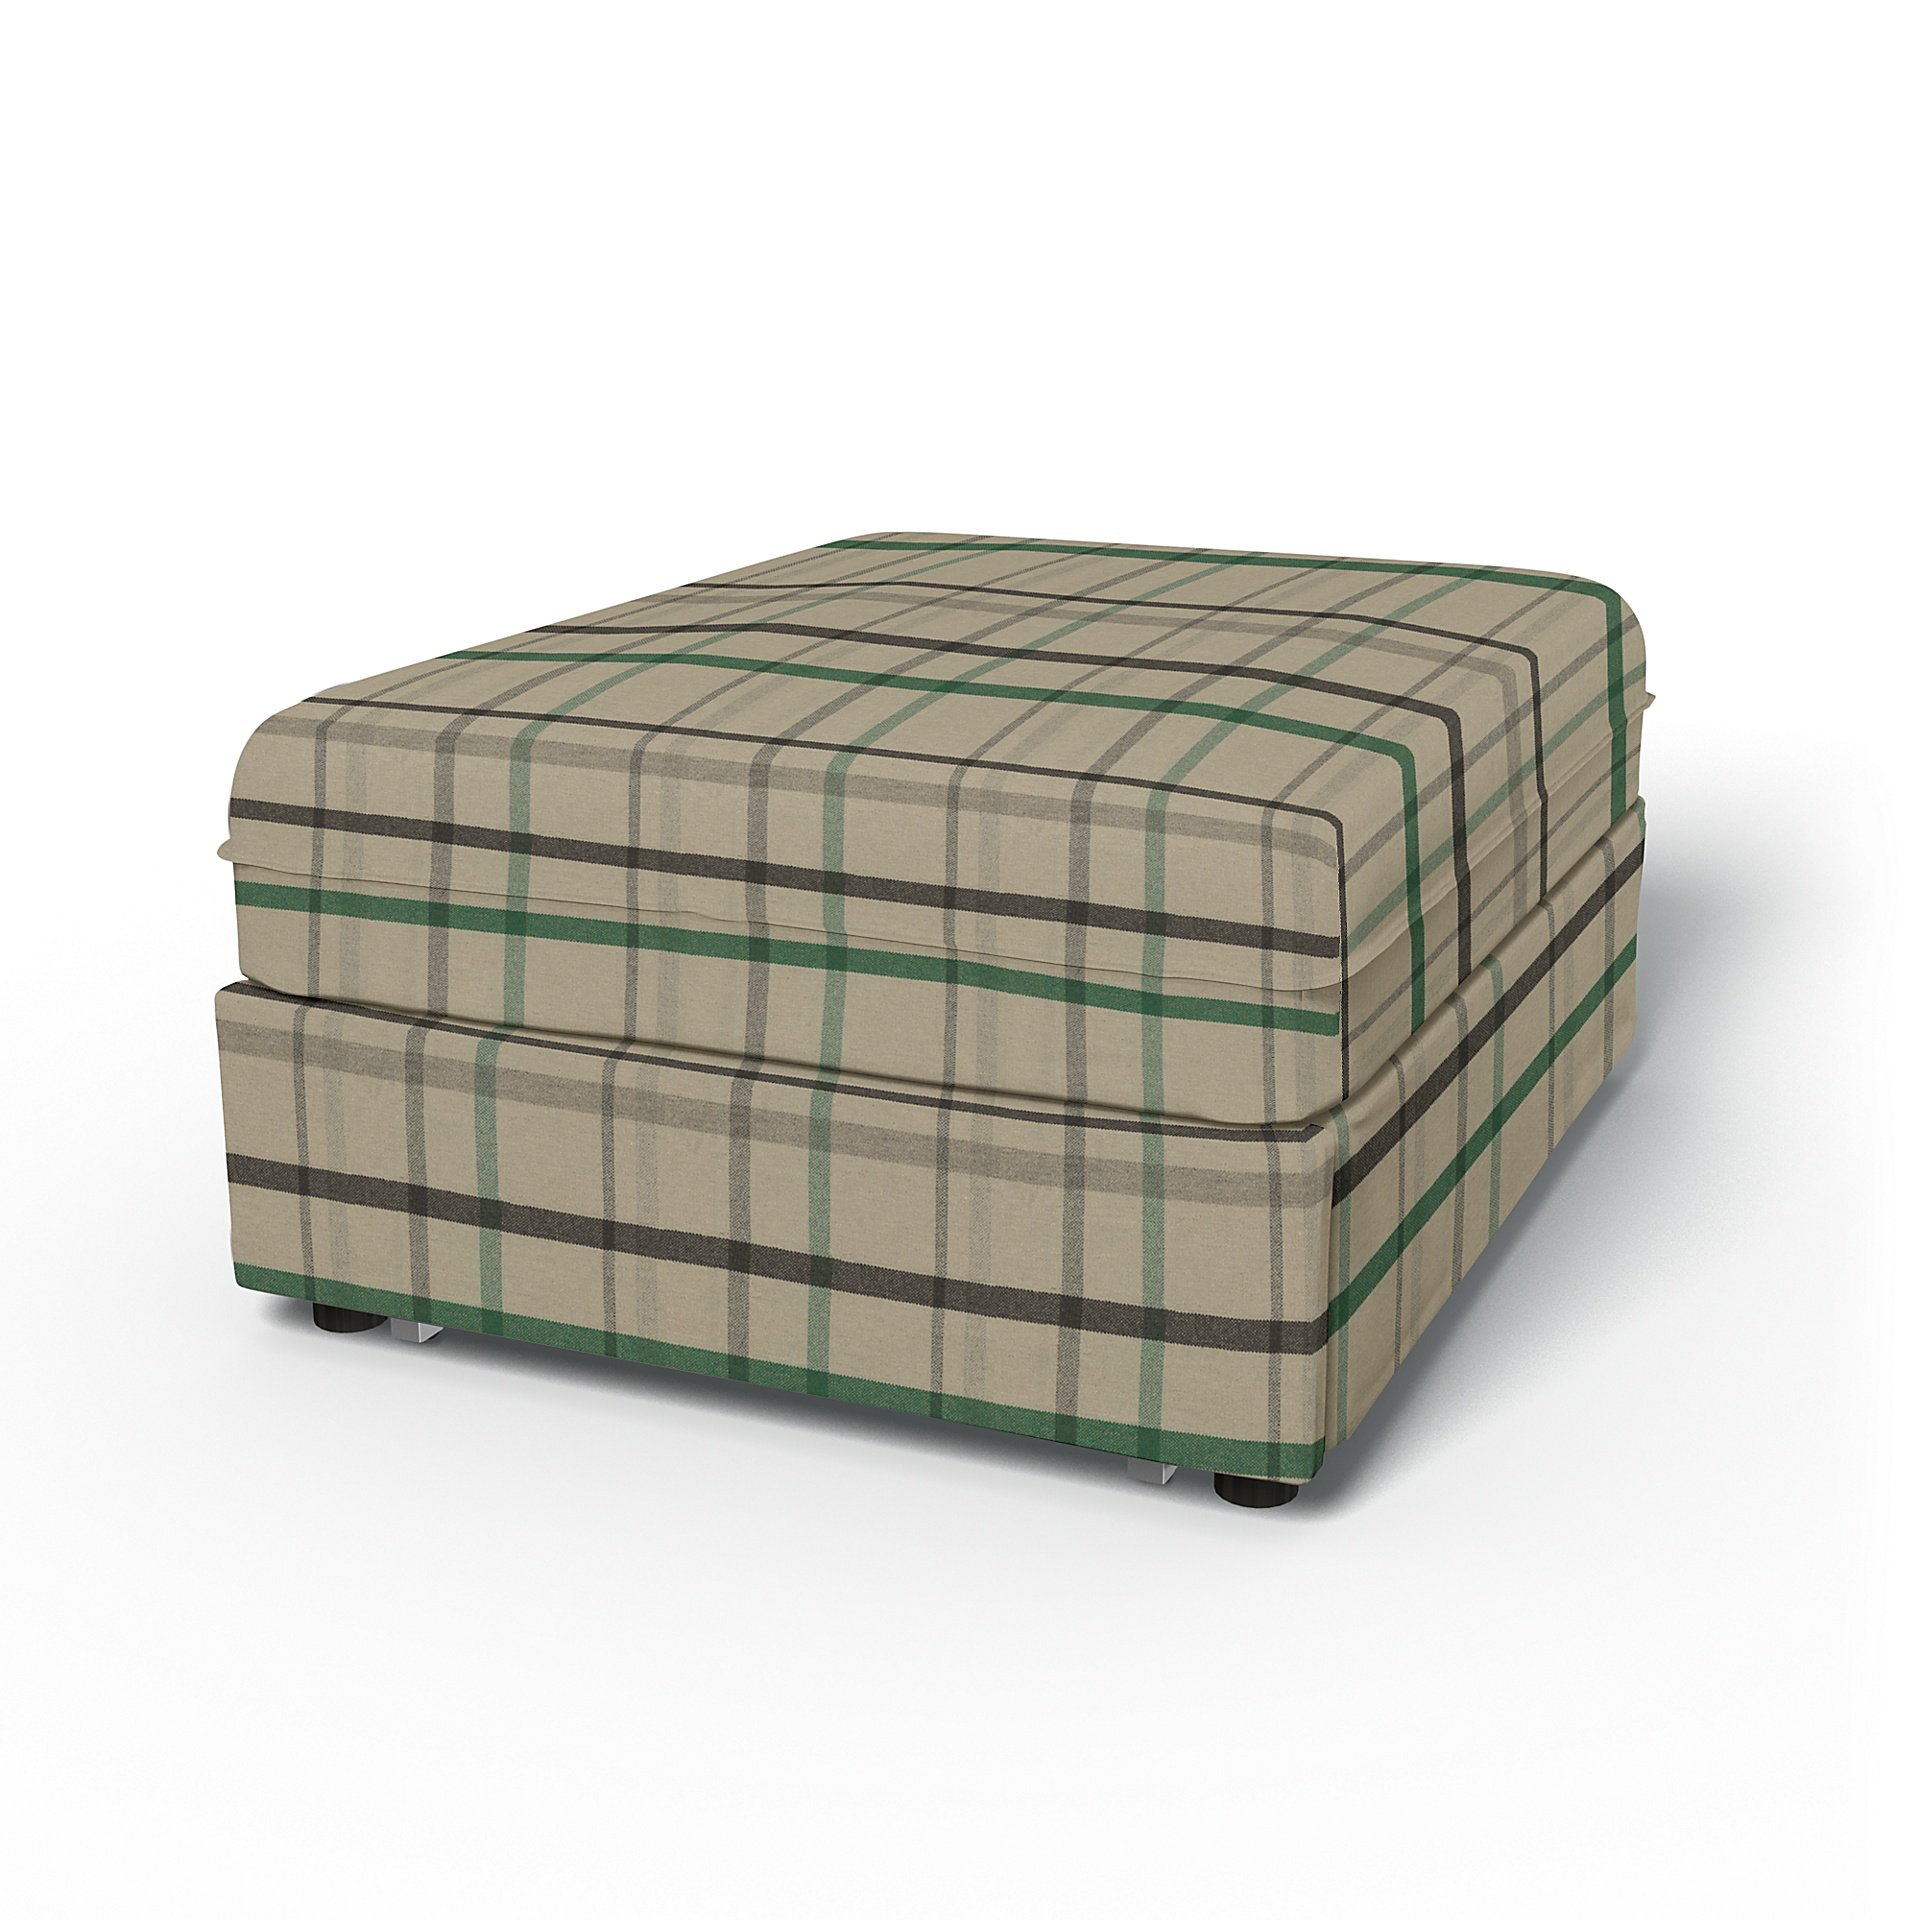 IKEA - Vallentuna Seat Module with Sofa Bed Cover 80x100cm 32x39in, Forest Glade, Wool - Bemz